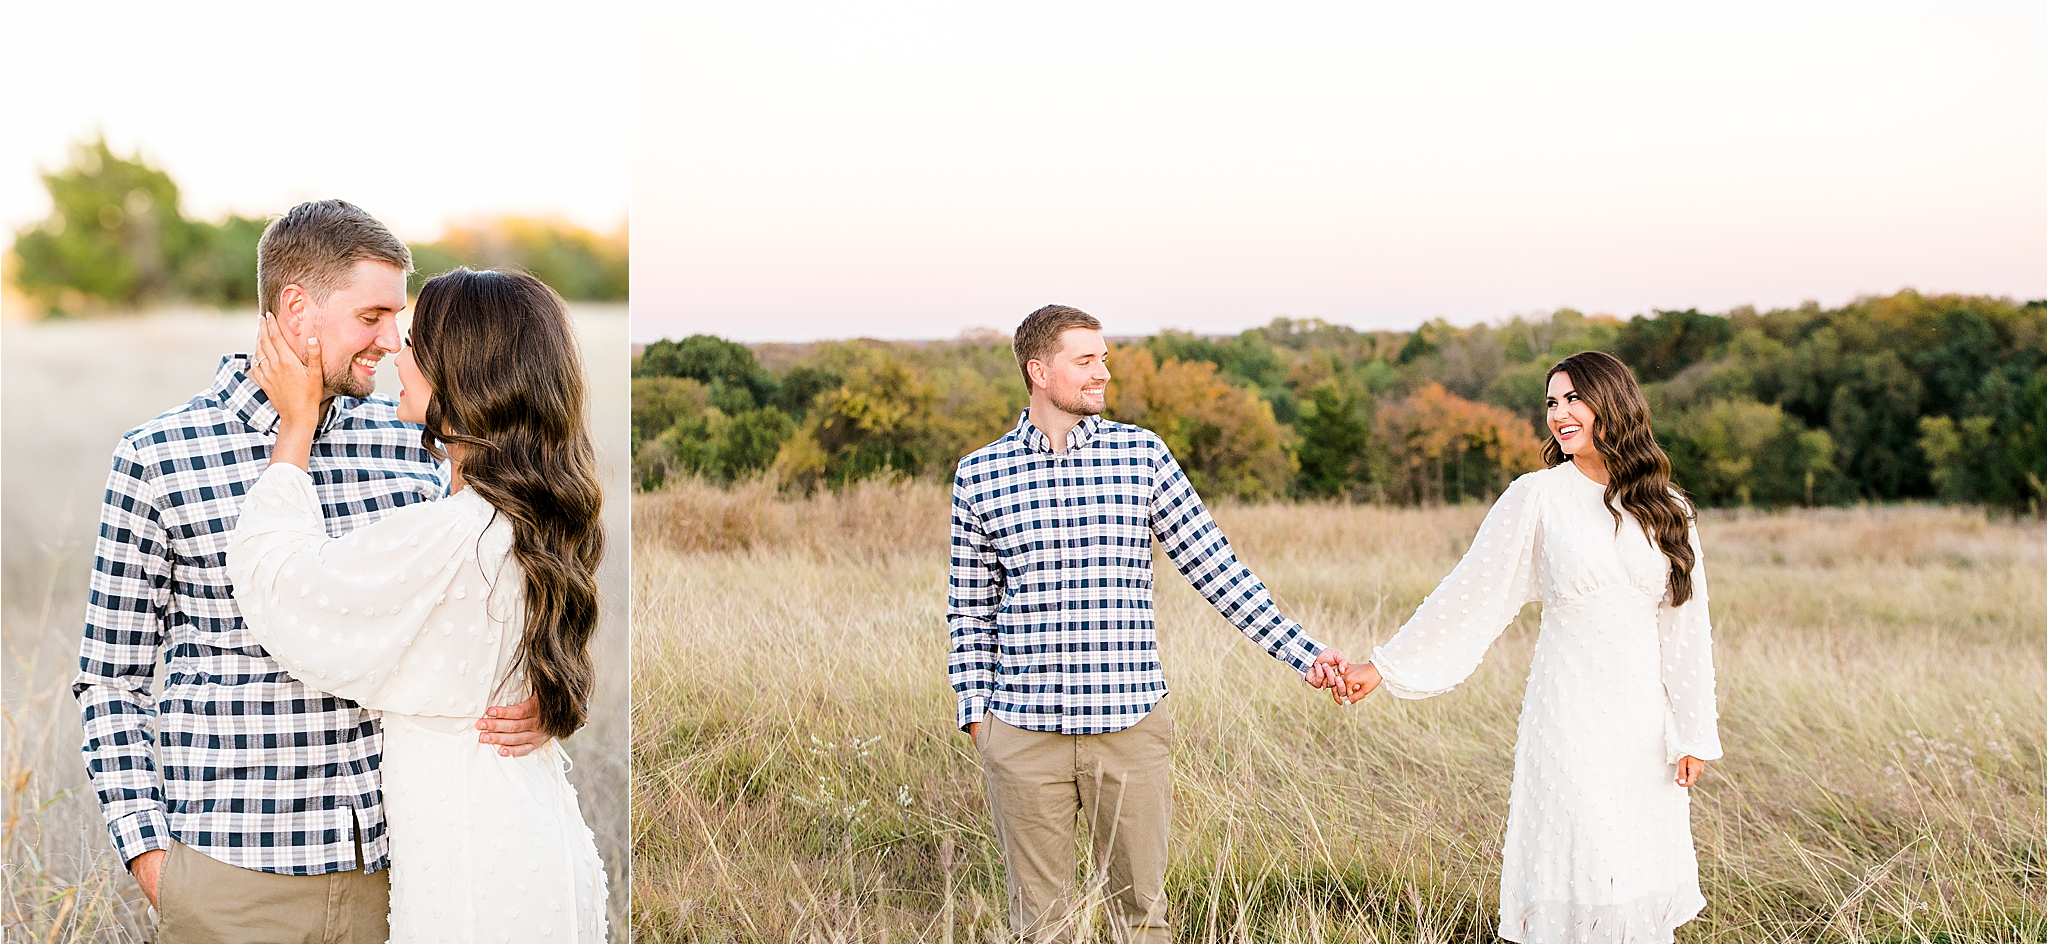 An engaged couple in an ivory lace dress and a blue plaid shirt hold hands in a field during a colorful sunset